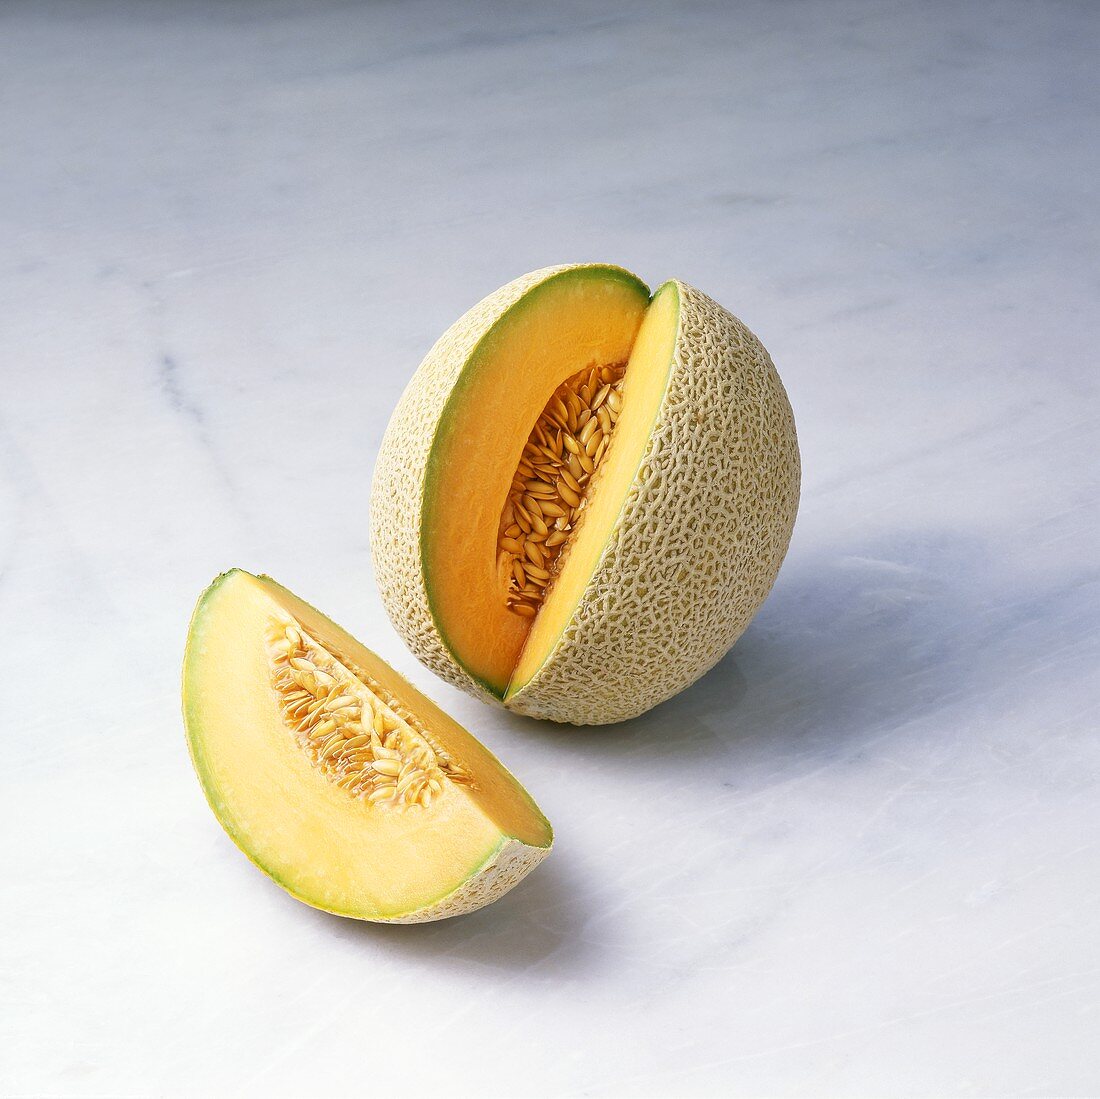 Cantaloupe Melon with a Wedge Cut Out